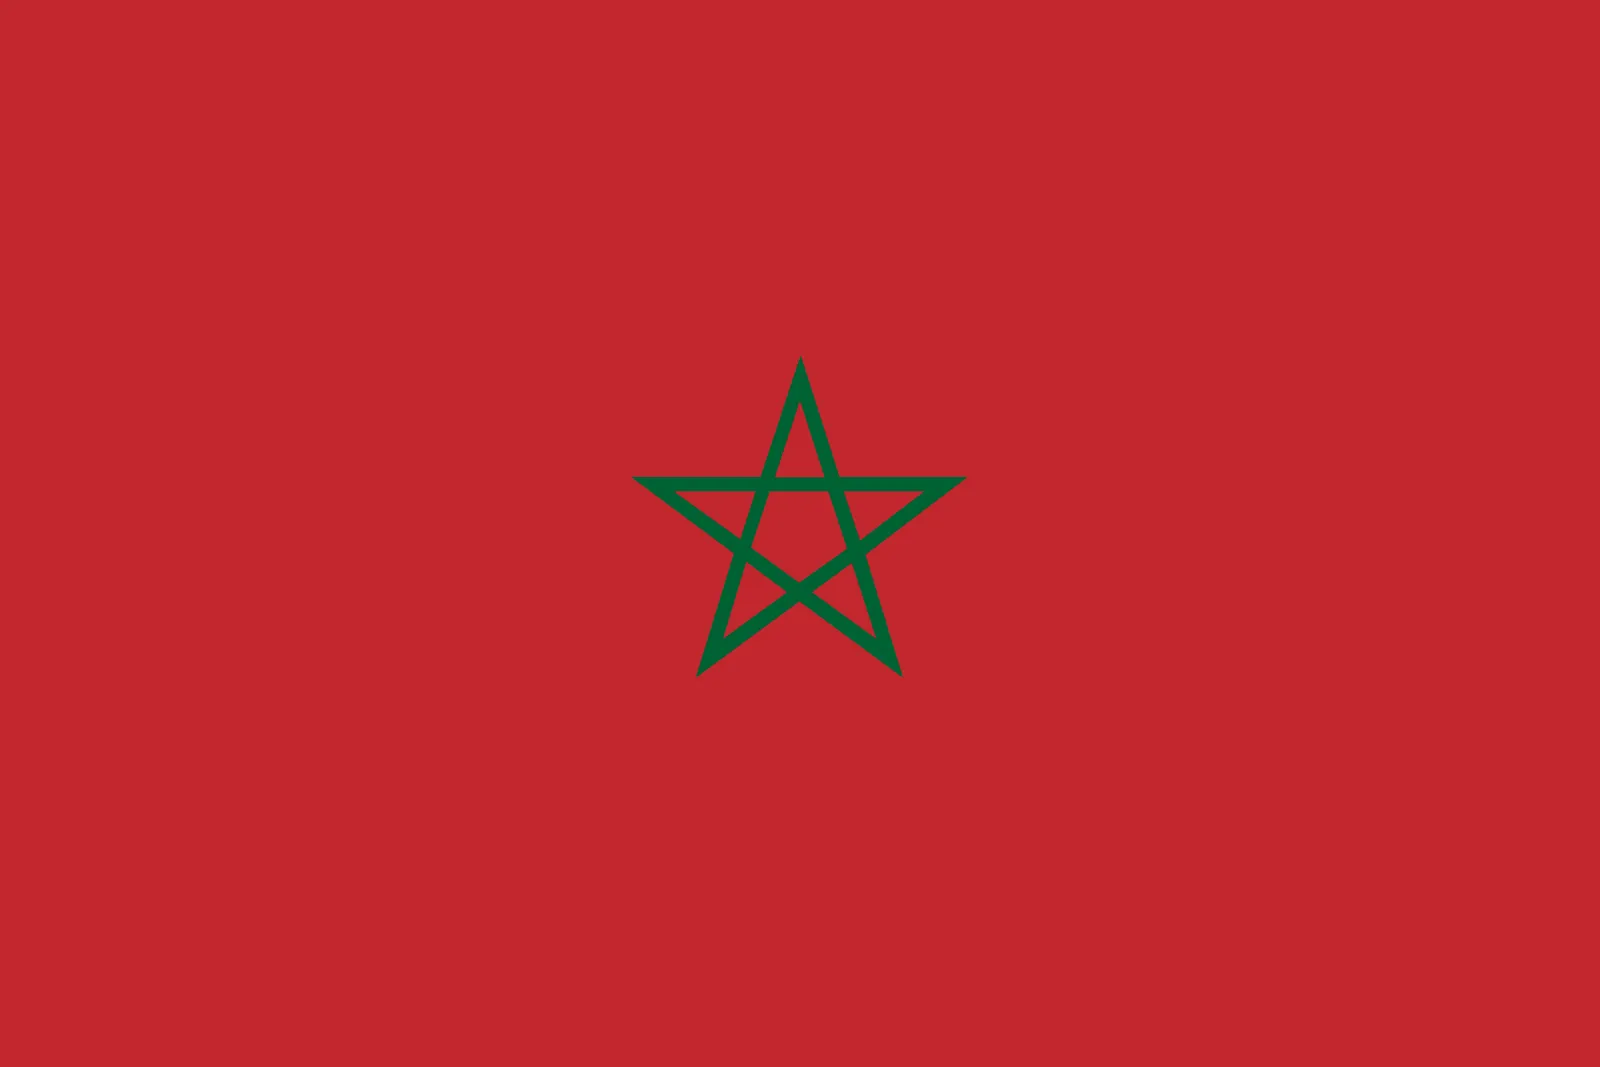 In this blog article, we will give a brief history of Morocco.